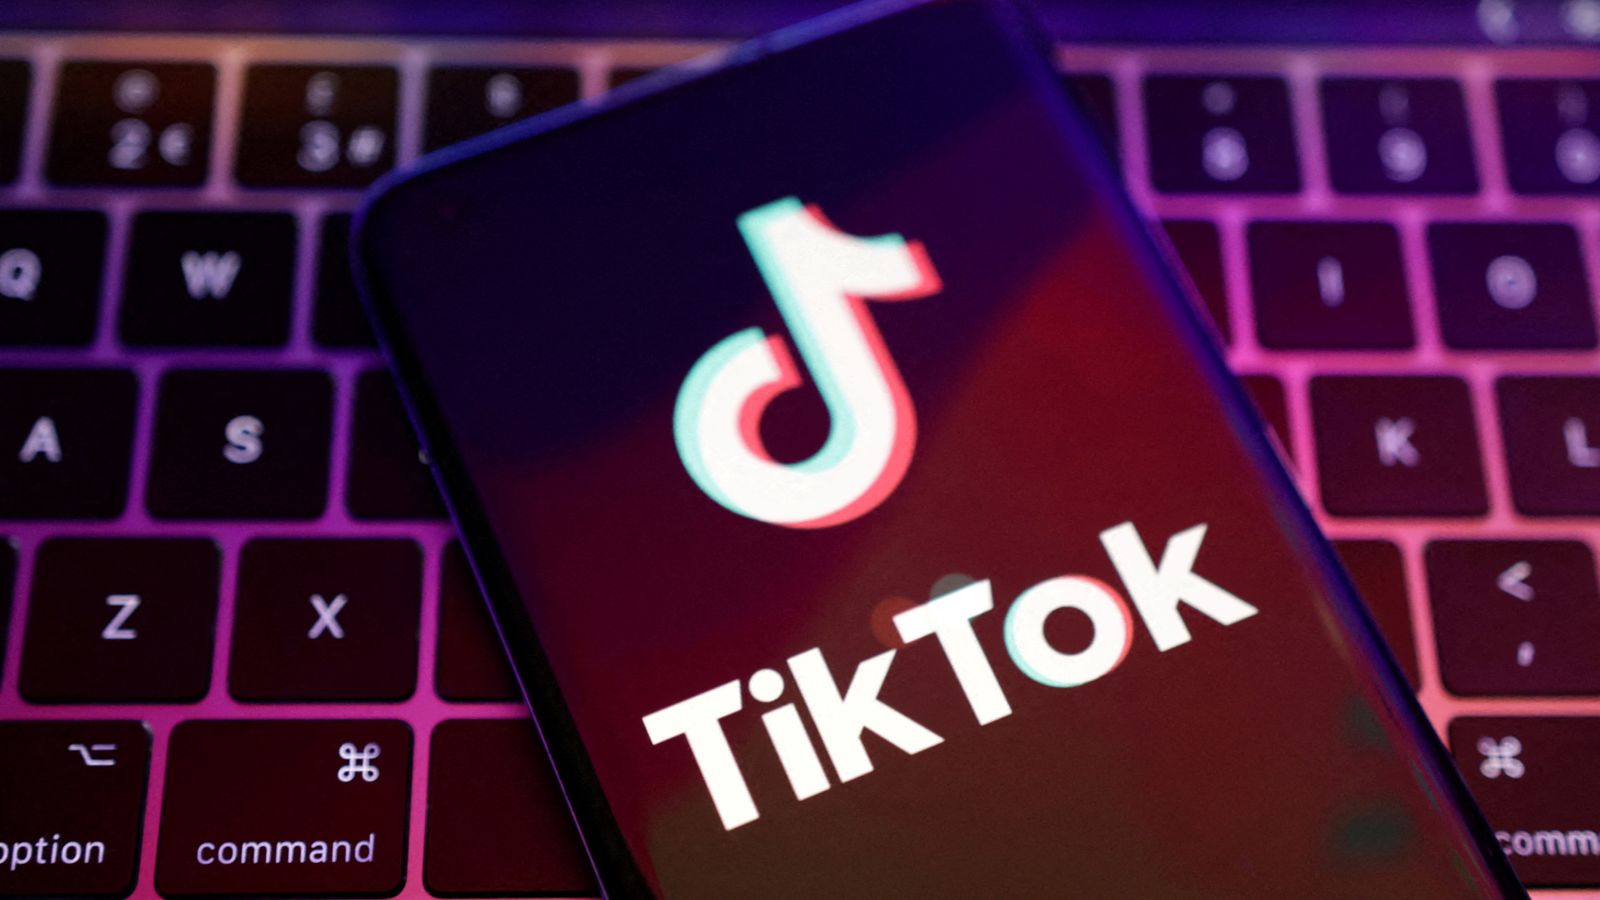 Delete TikTok or risk your data being exposed to 'hostile' threats, warns foreign affairs committee chief